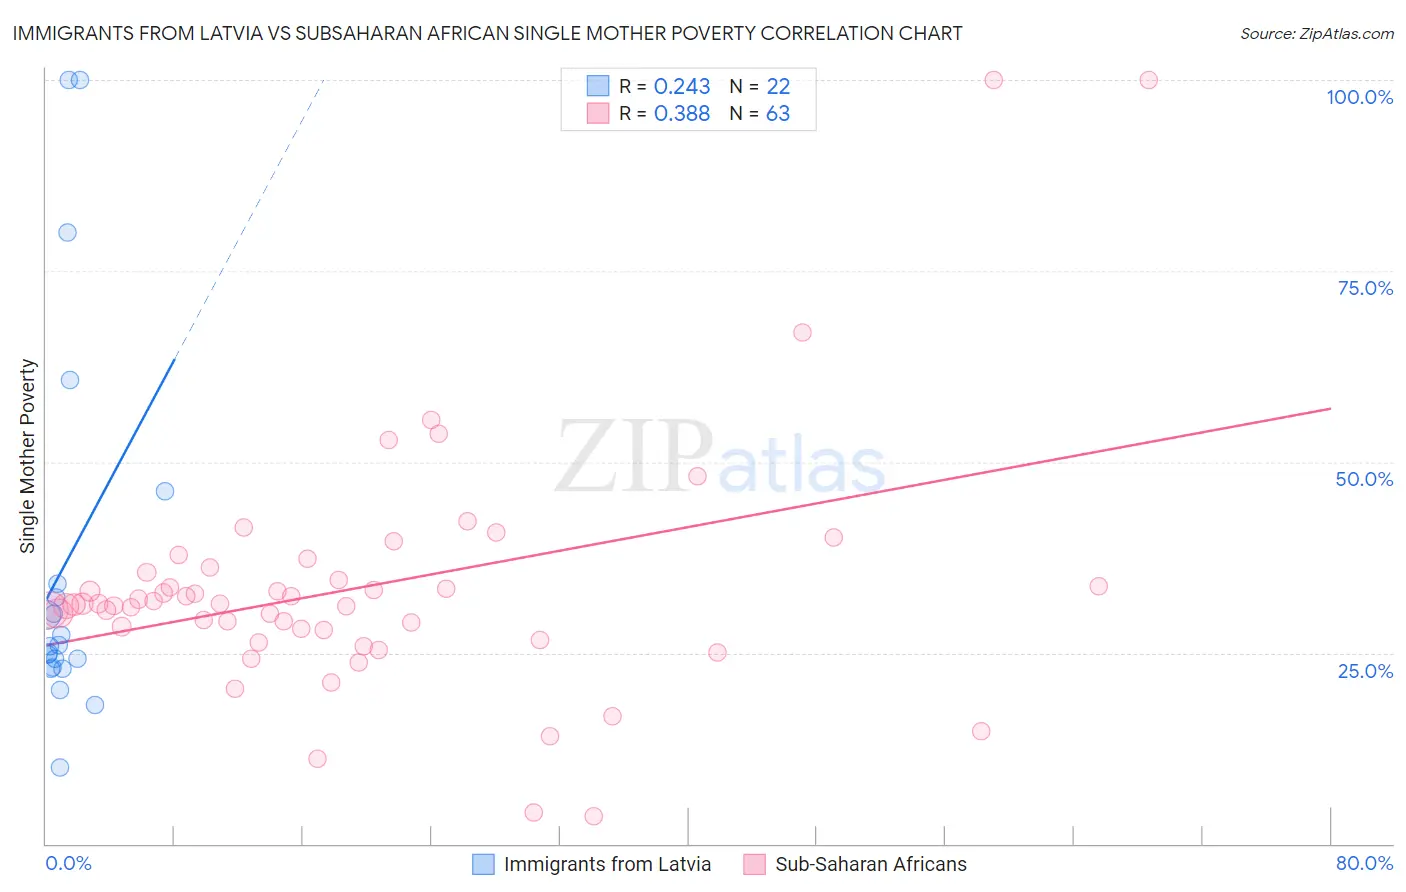 Immigrants from Latvia vs Subsaharan African Single Mother Poverty